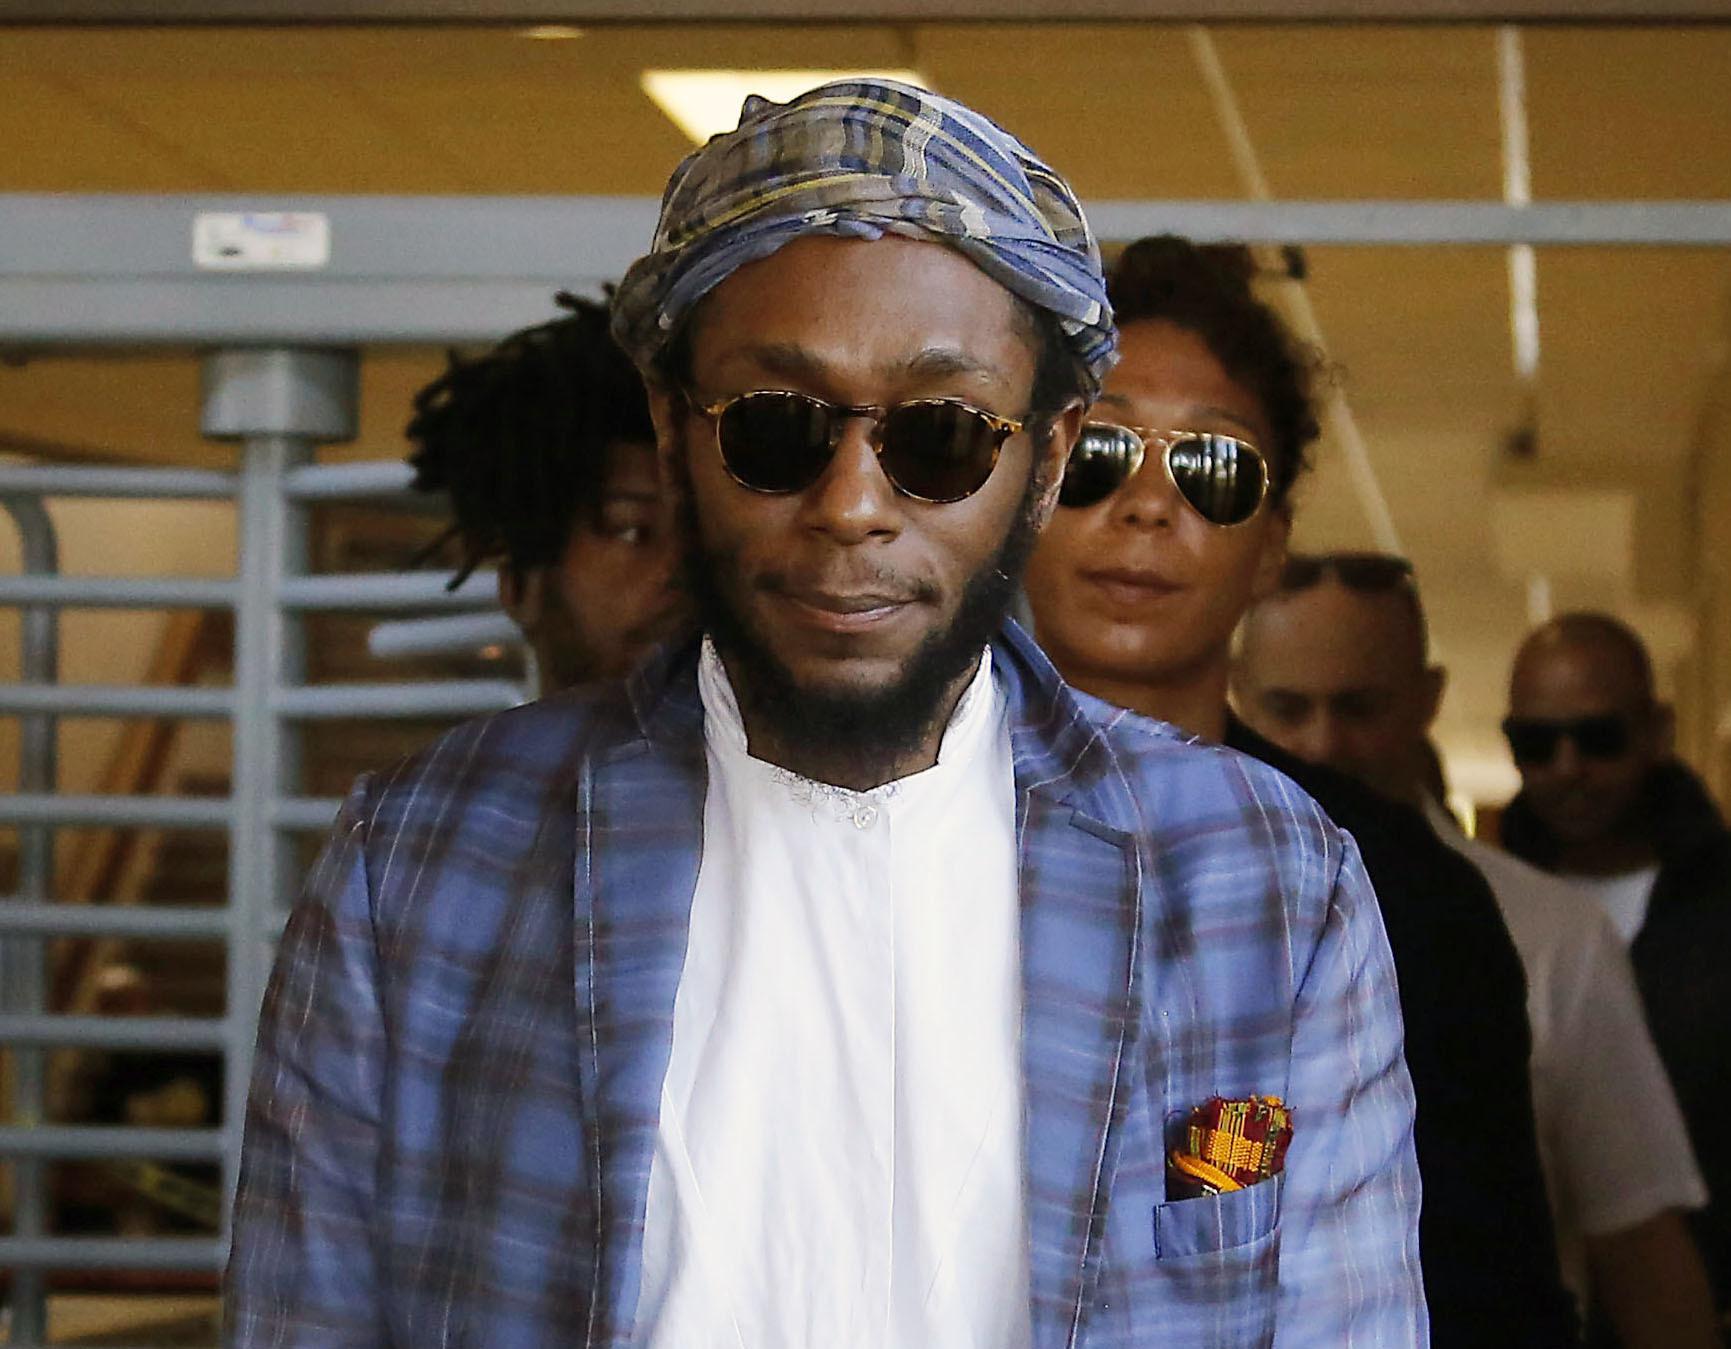 Whatever Happened To Mos Def?